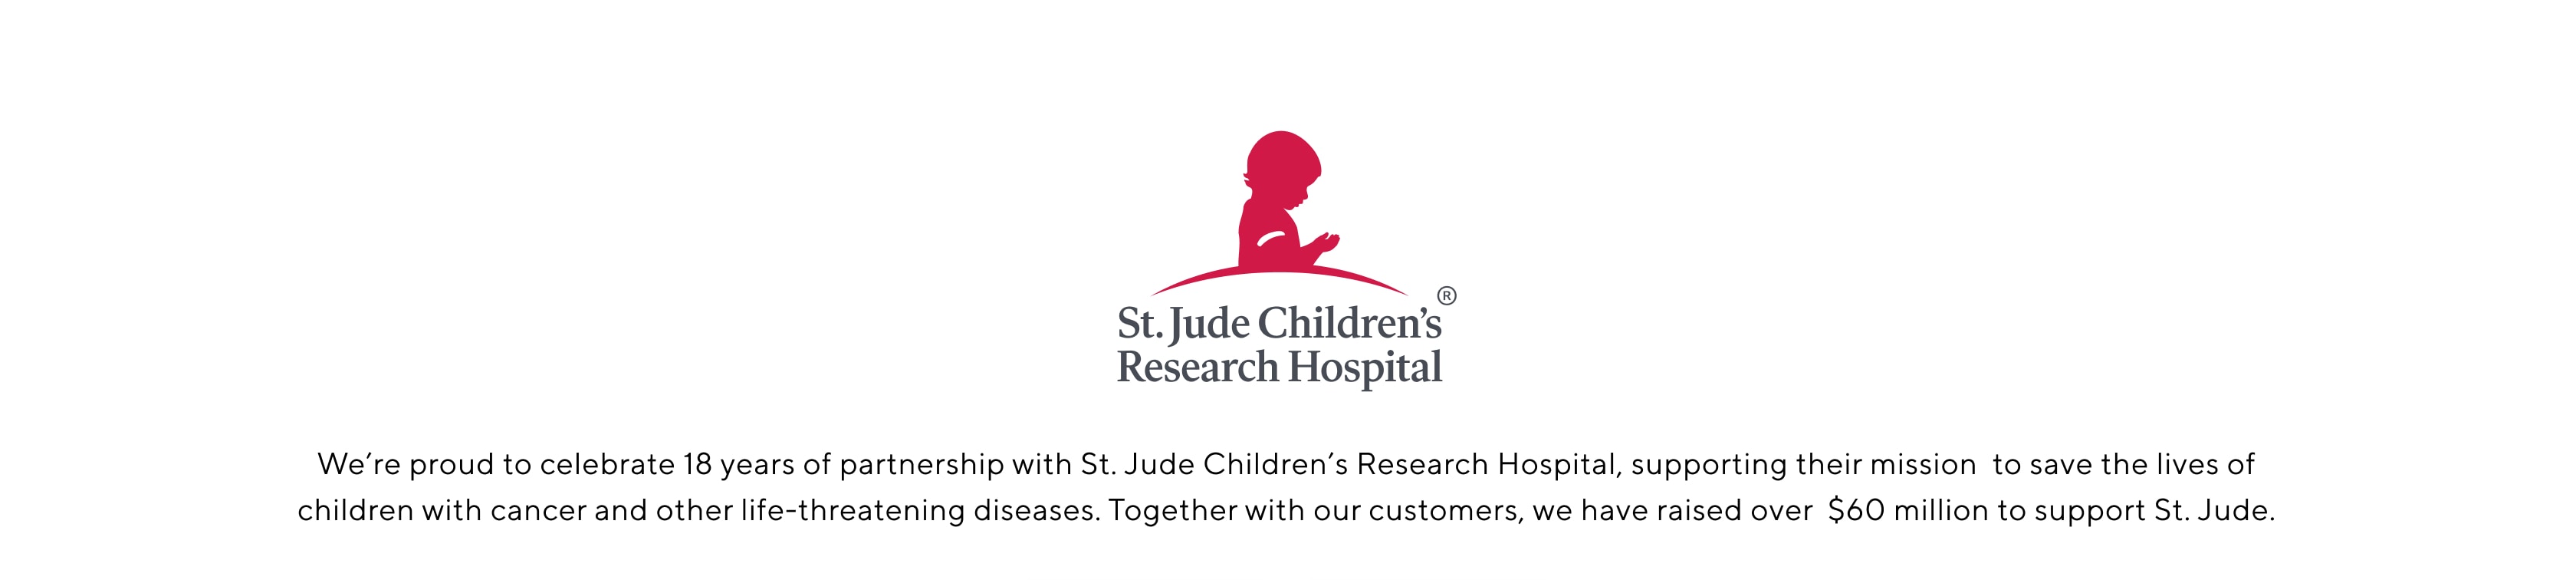 For 18 years, Pottery Barn has raised and donated funds to support St. Jude Children's Research Hospital in its mission to find cures and save children. 